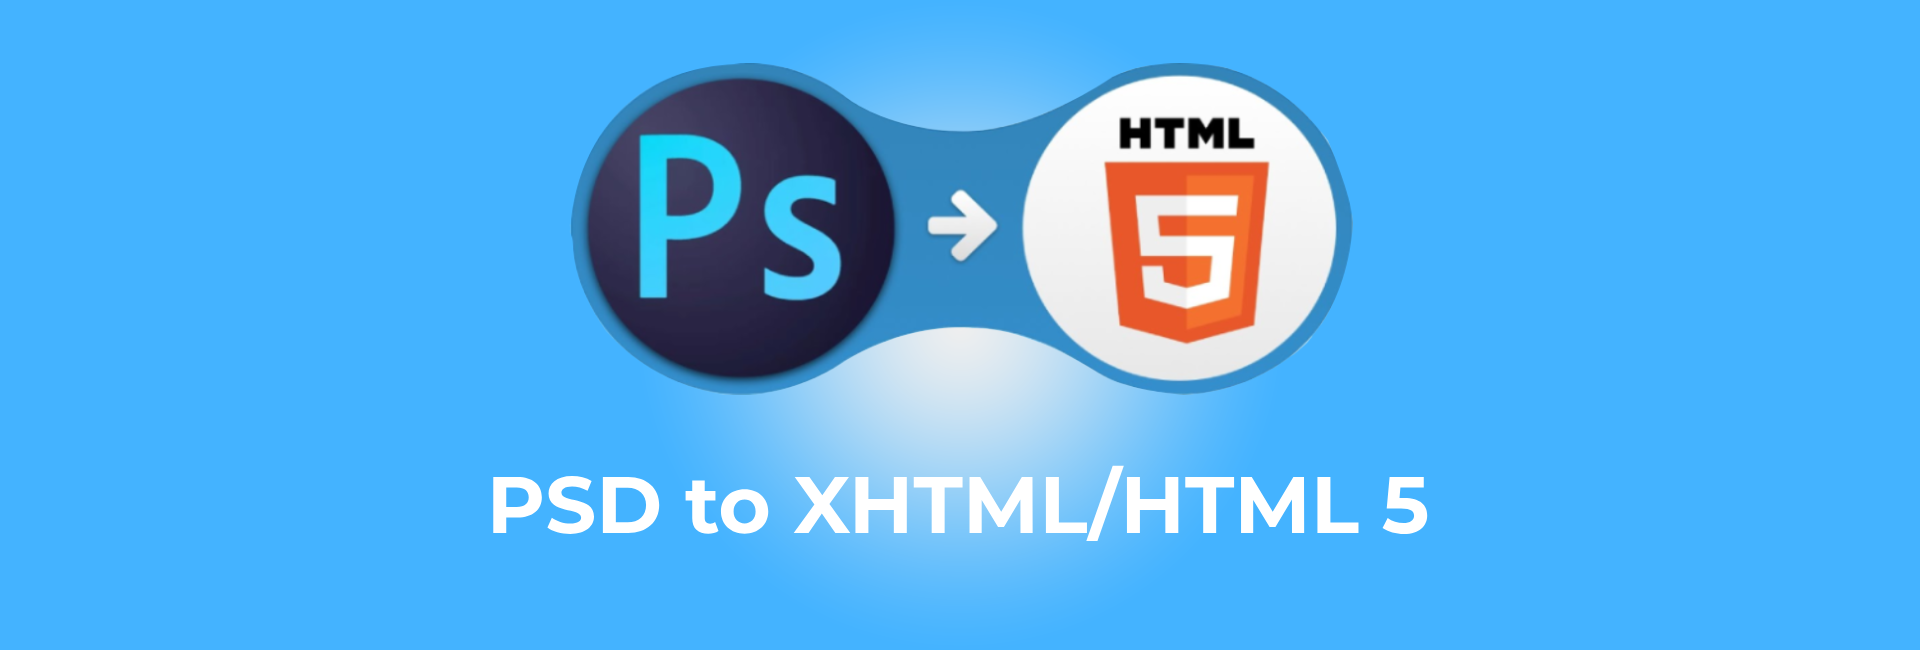 PSD to XHTML/HTML 5